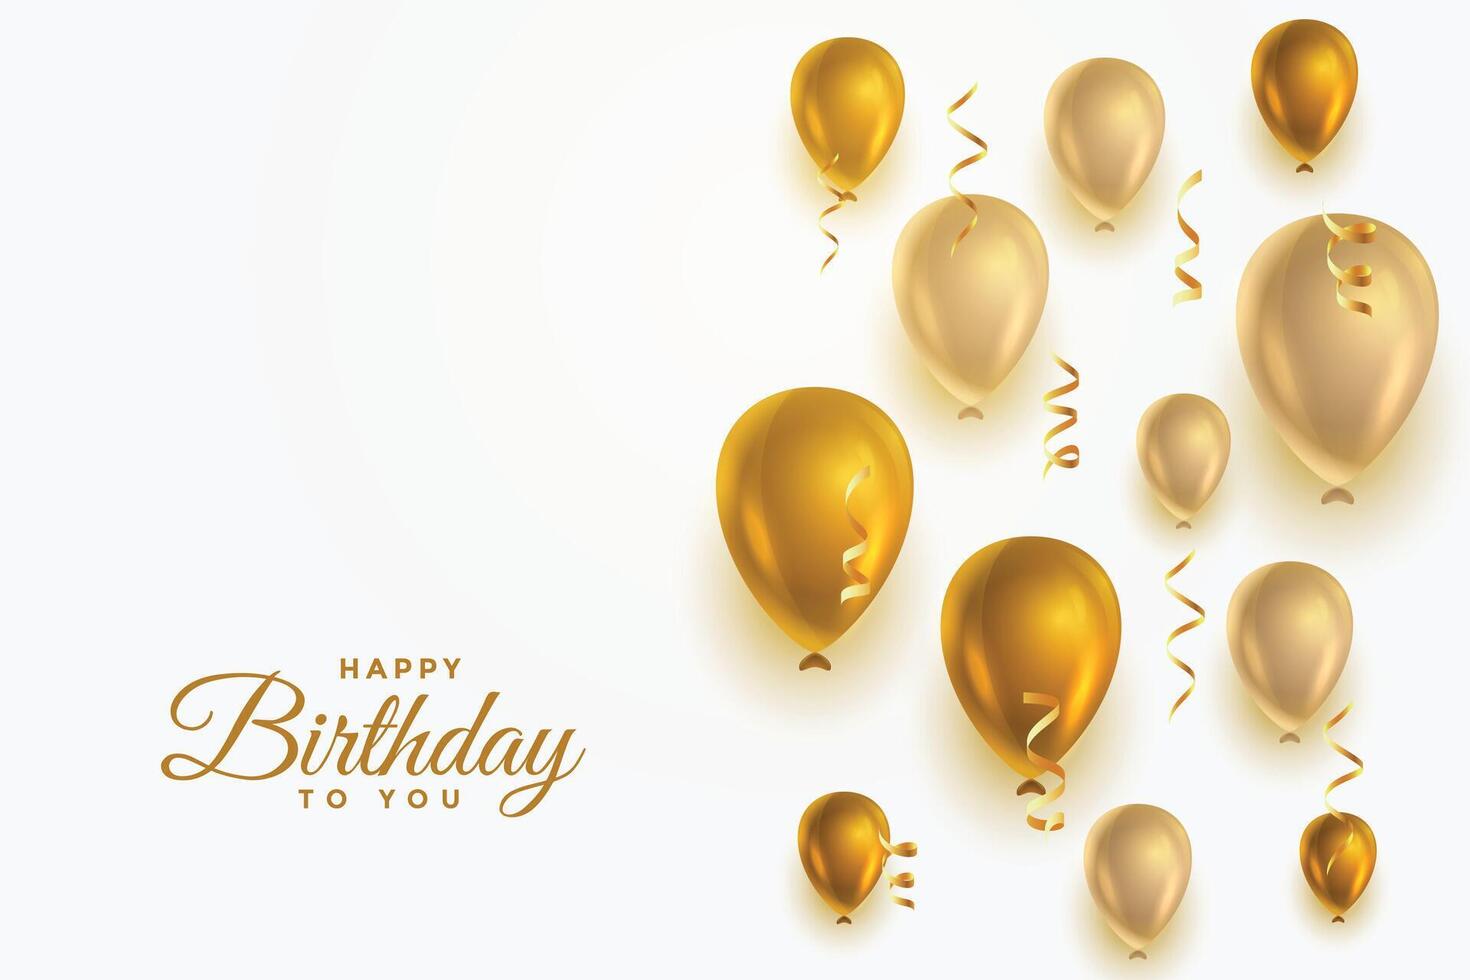 happy birthday greeting card poster with balloon decoration vector